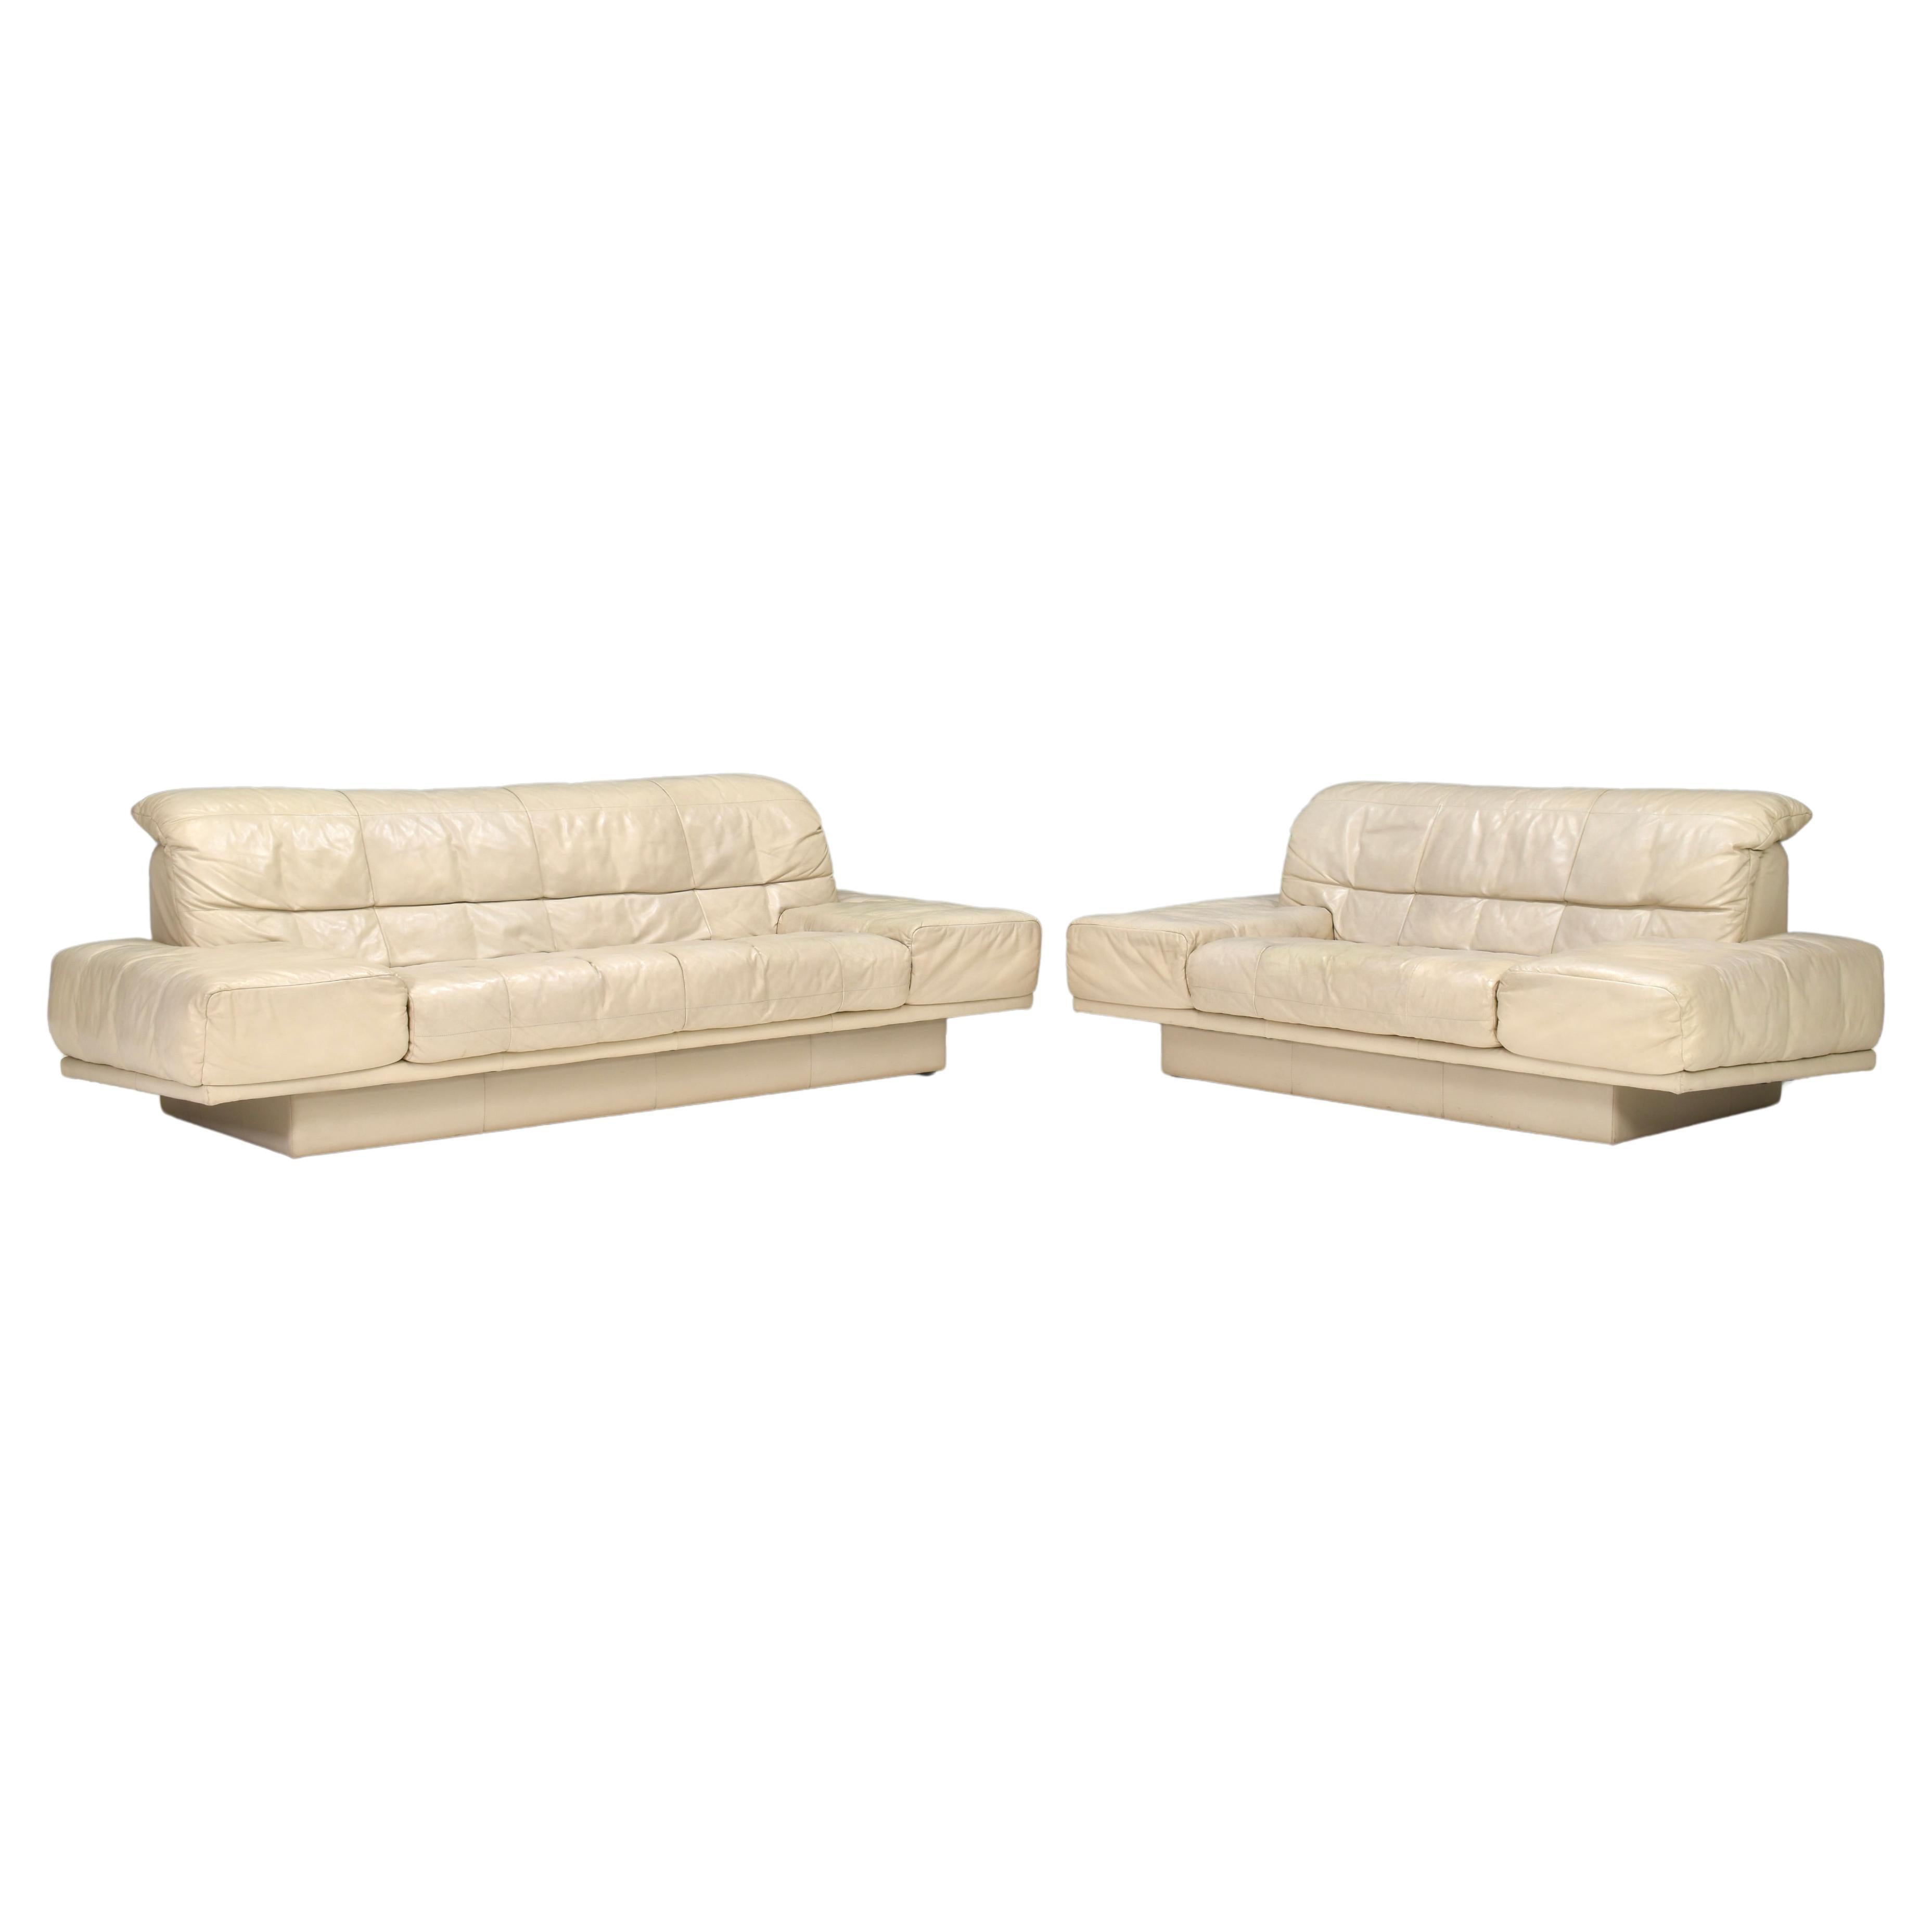 Pair of Rolf Benz sofa’s 2-seat and 3-seat – Germany, circa 1980-1990